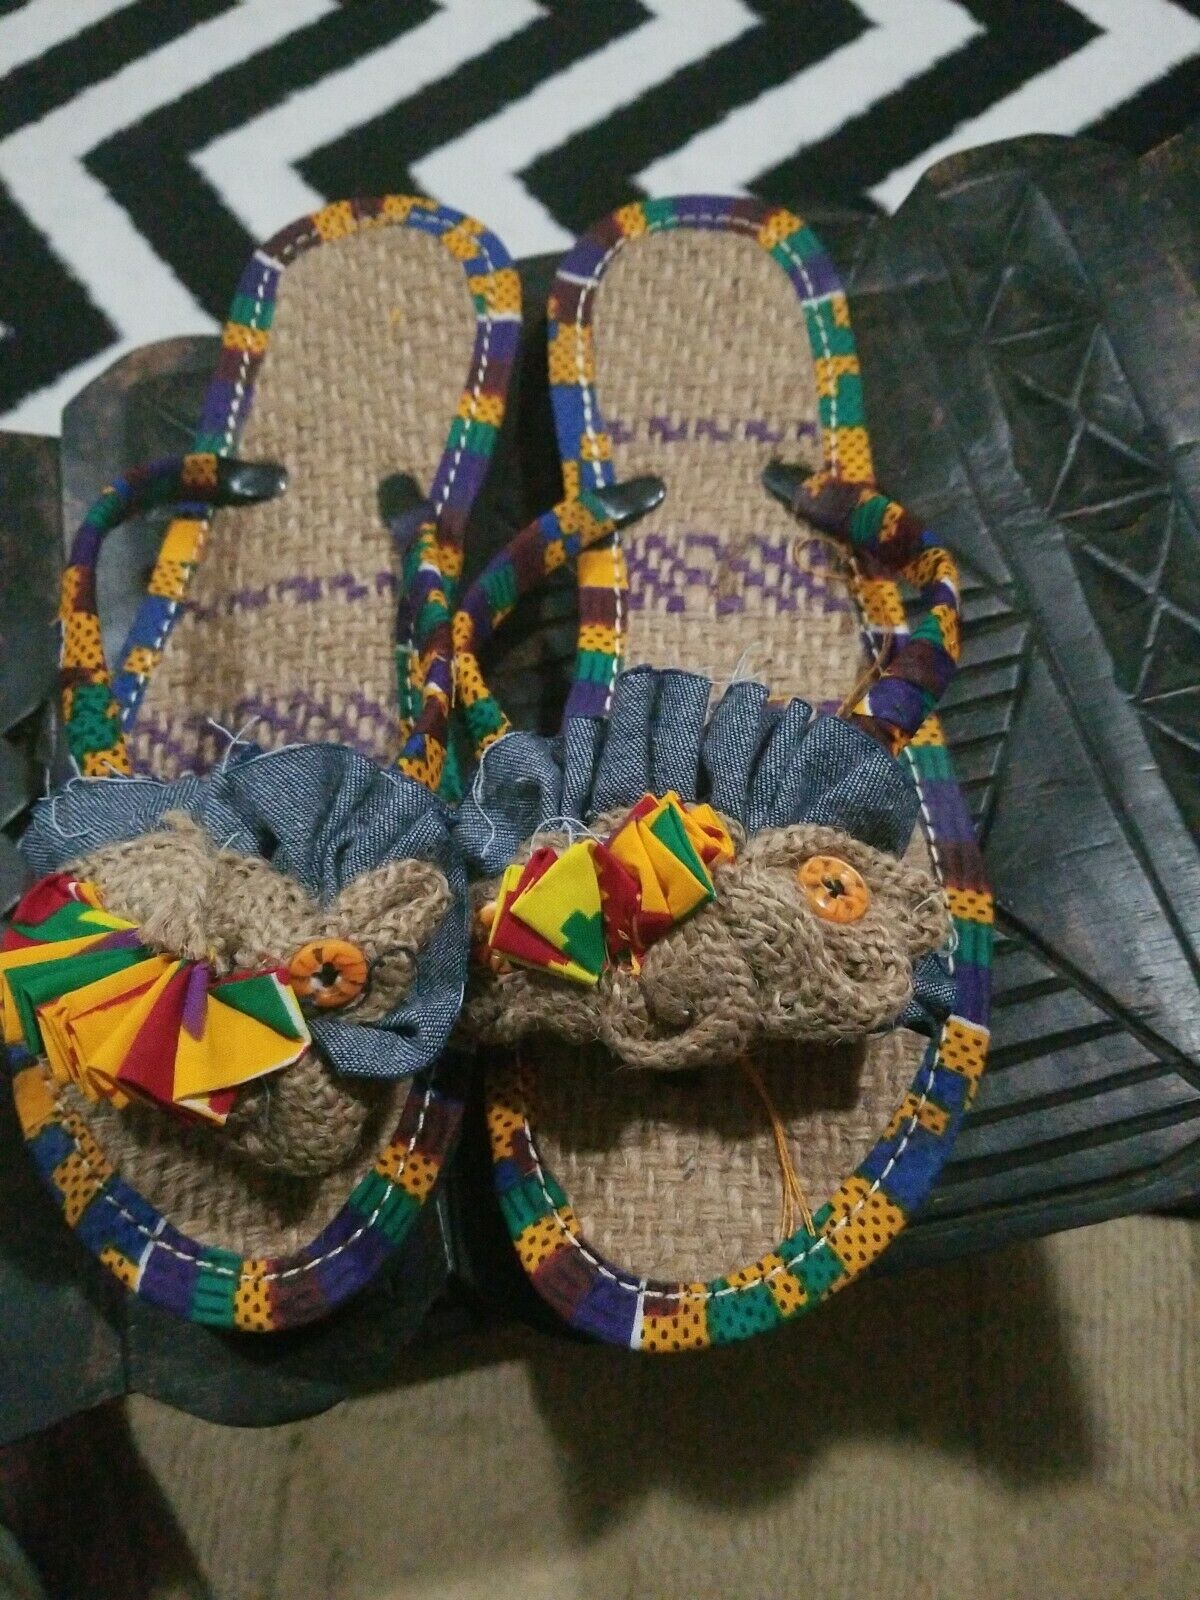 Handmade Kente Slippers with Denim Accents~Size 10.5M(Fits US9-9.5)~$25ea